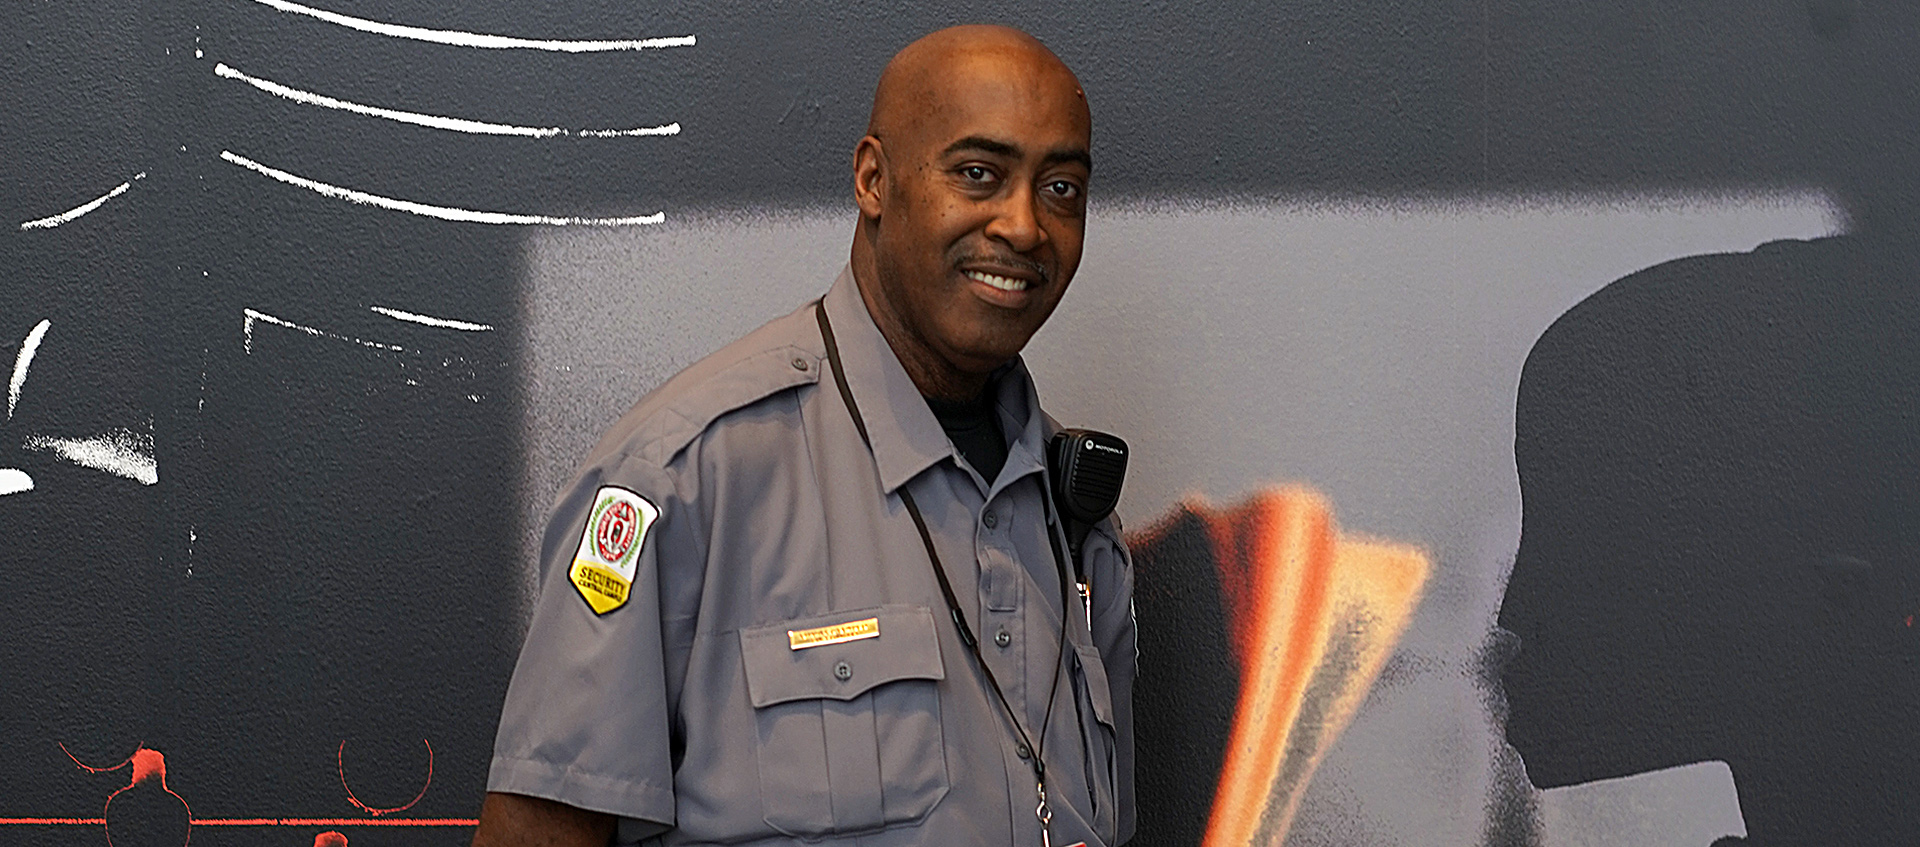 Charles Glasco, a security guard at the Wexner Center for the Arts at The Ohio State University, in the galleries on his last work day before retirement—May 31, 2019